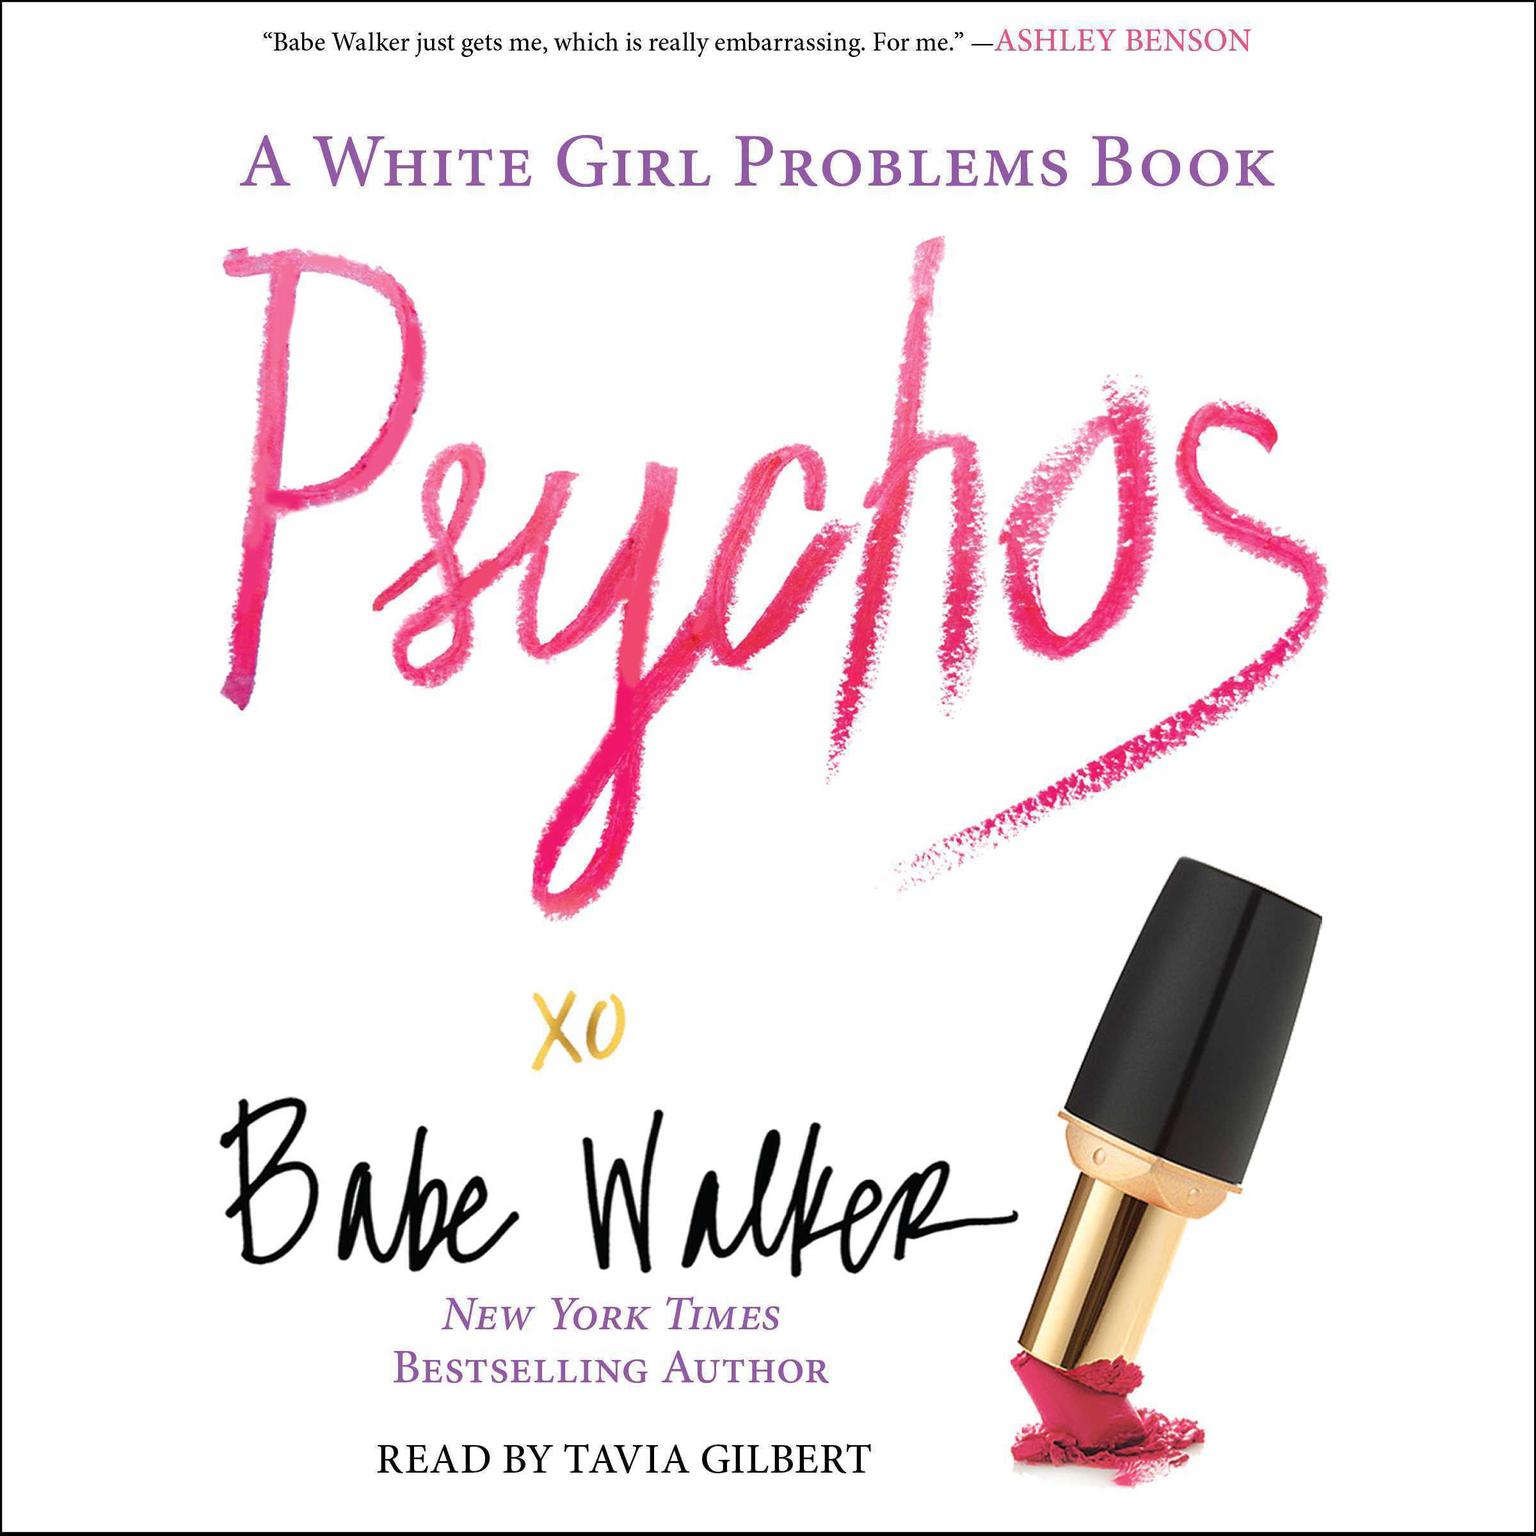 Psychos: A White Girl Problems Book: A White Girl Problems Book Audiobook, by Babe Walker